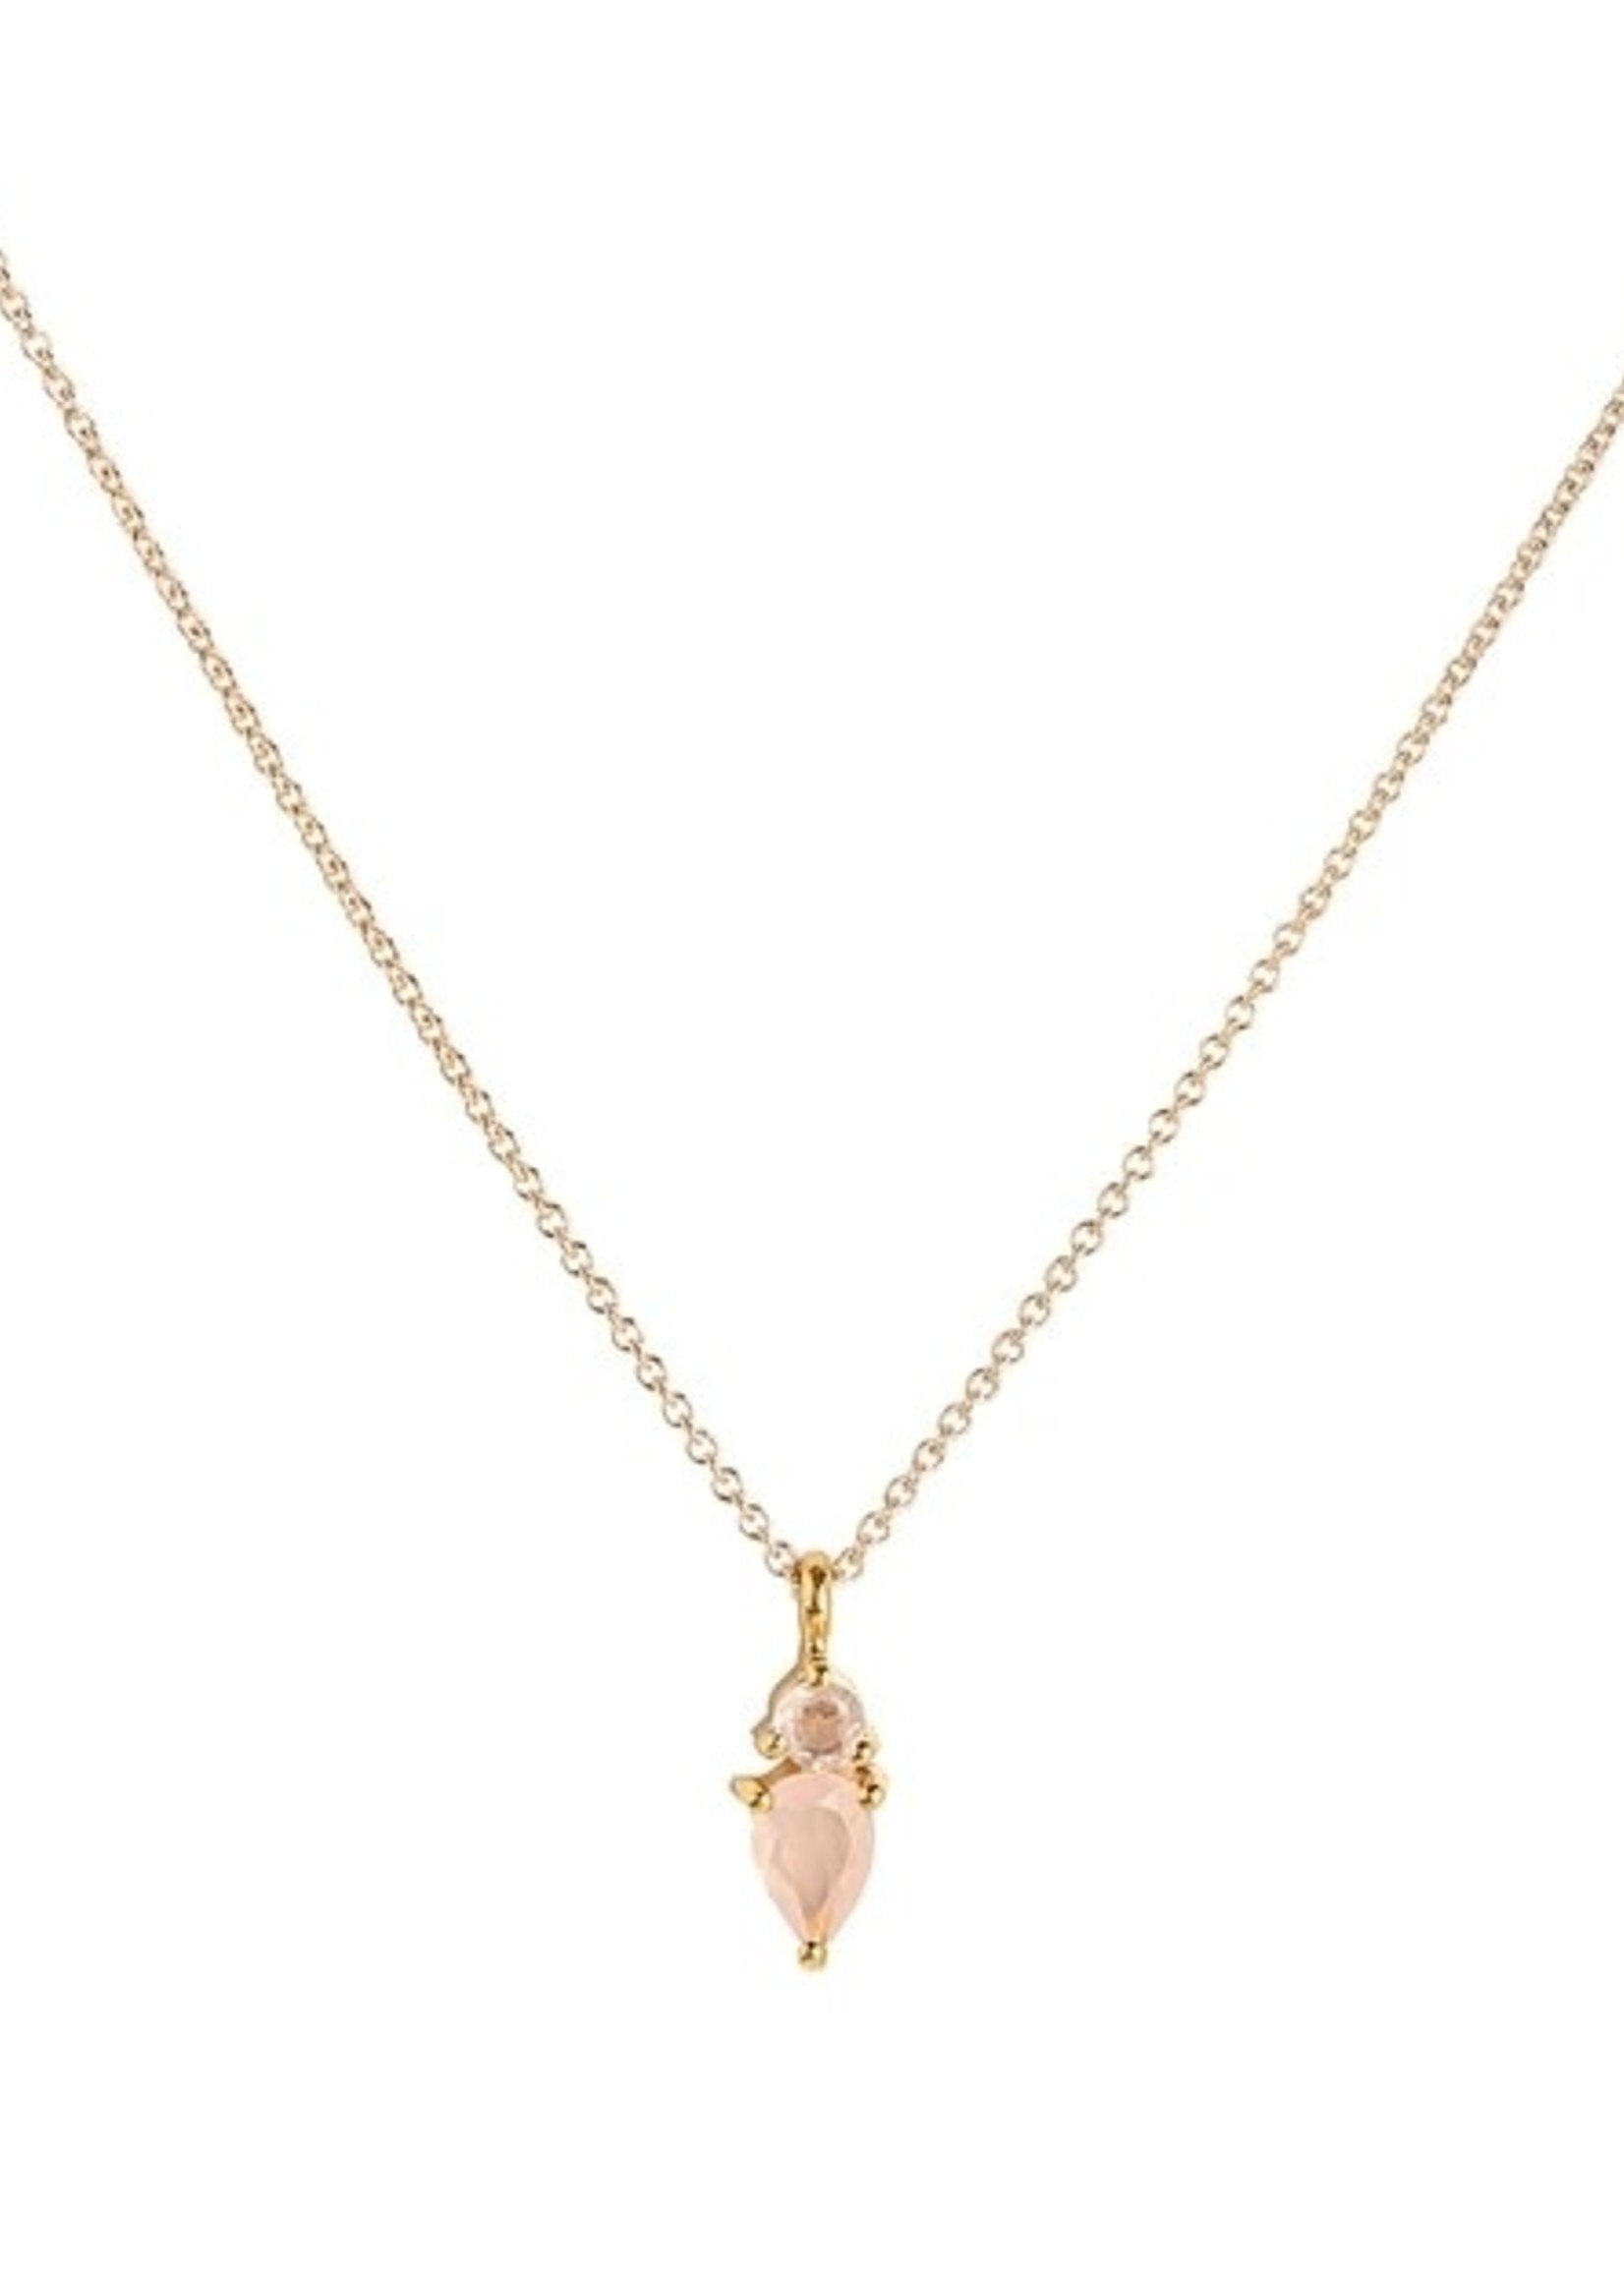 LEAH ALEXANDRA Fling Necklace, 16" Gold Fill Chain